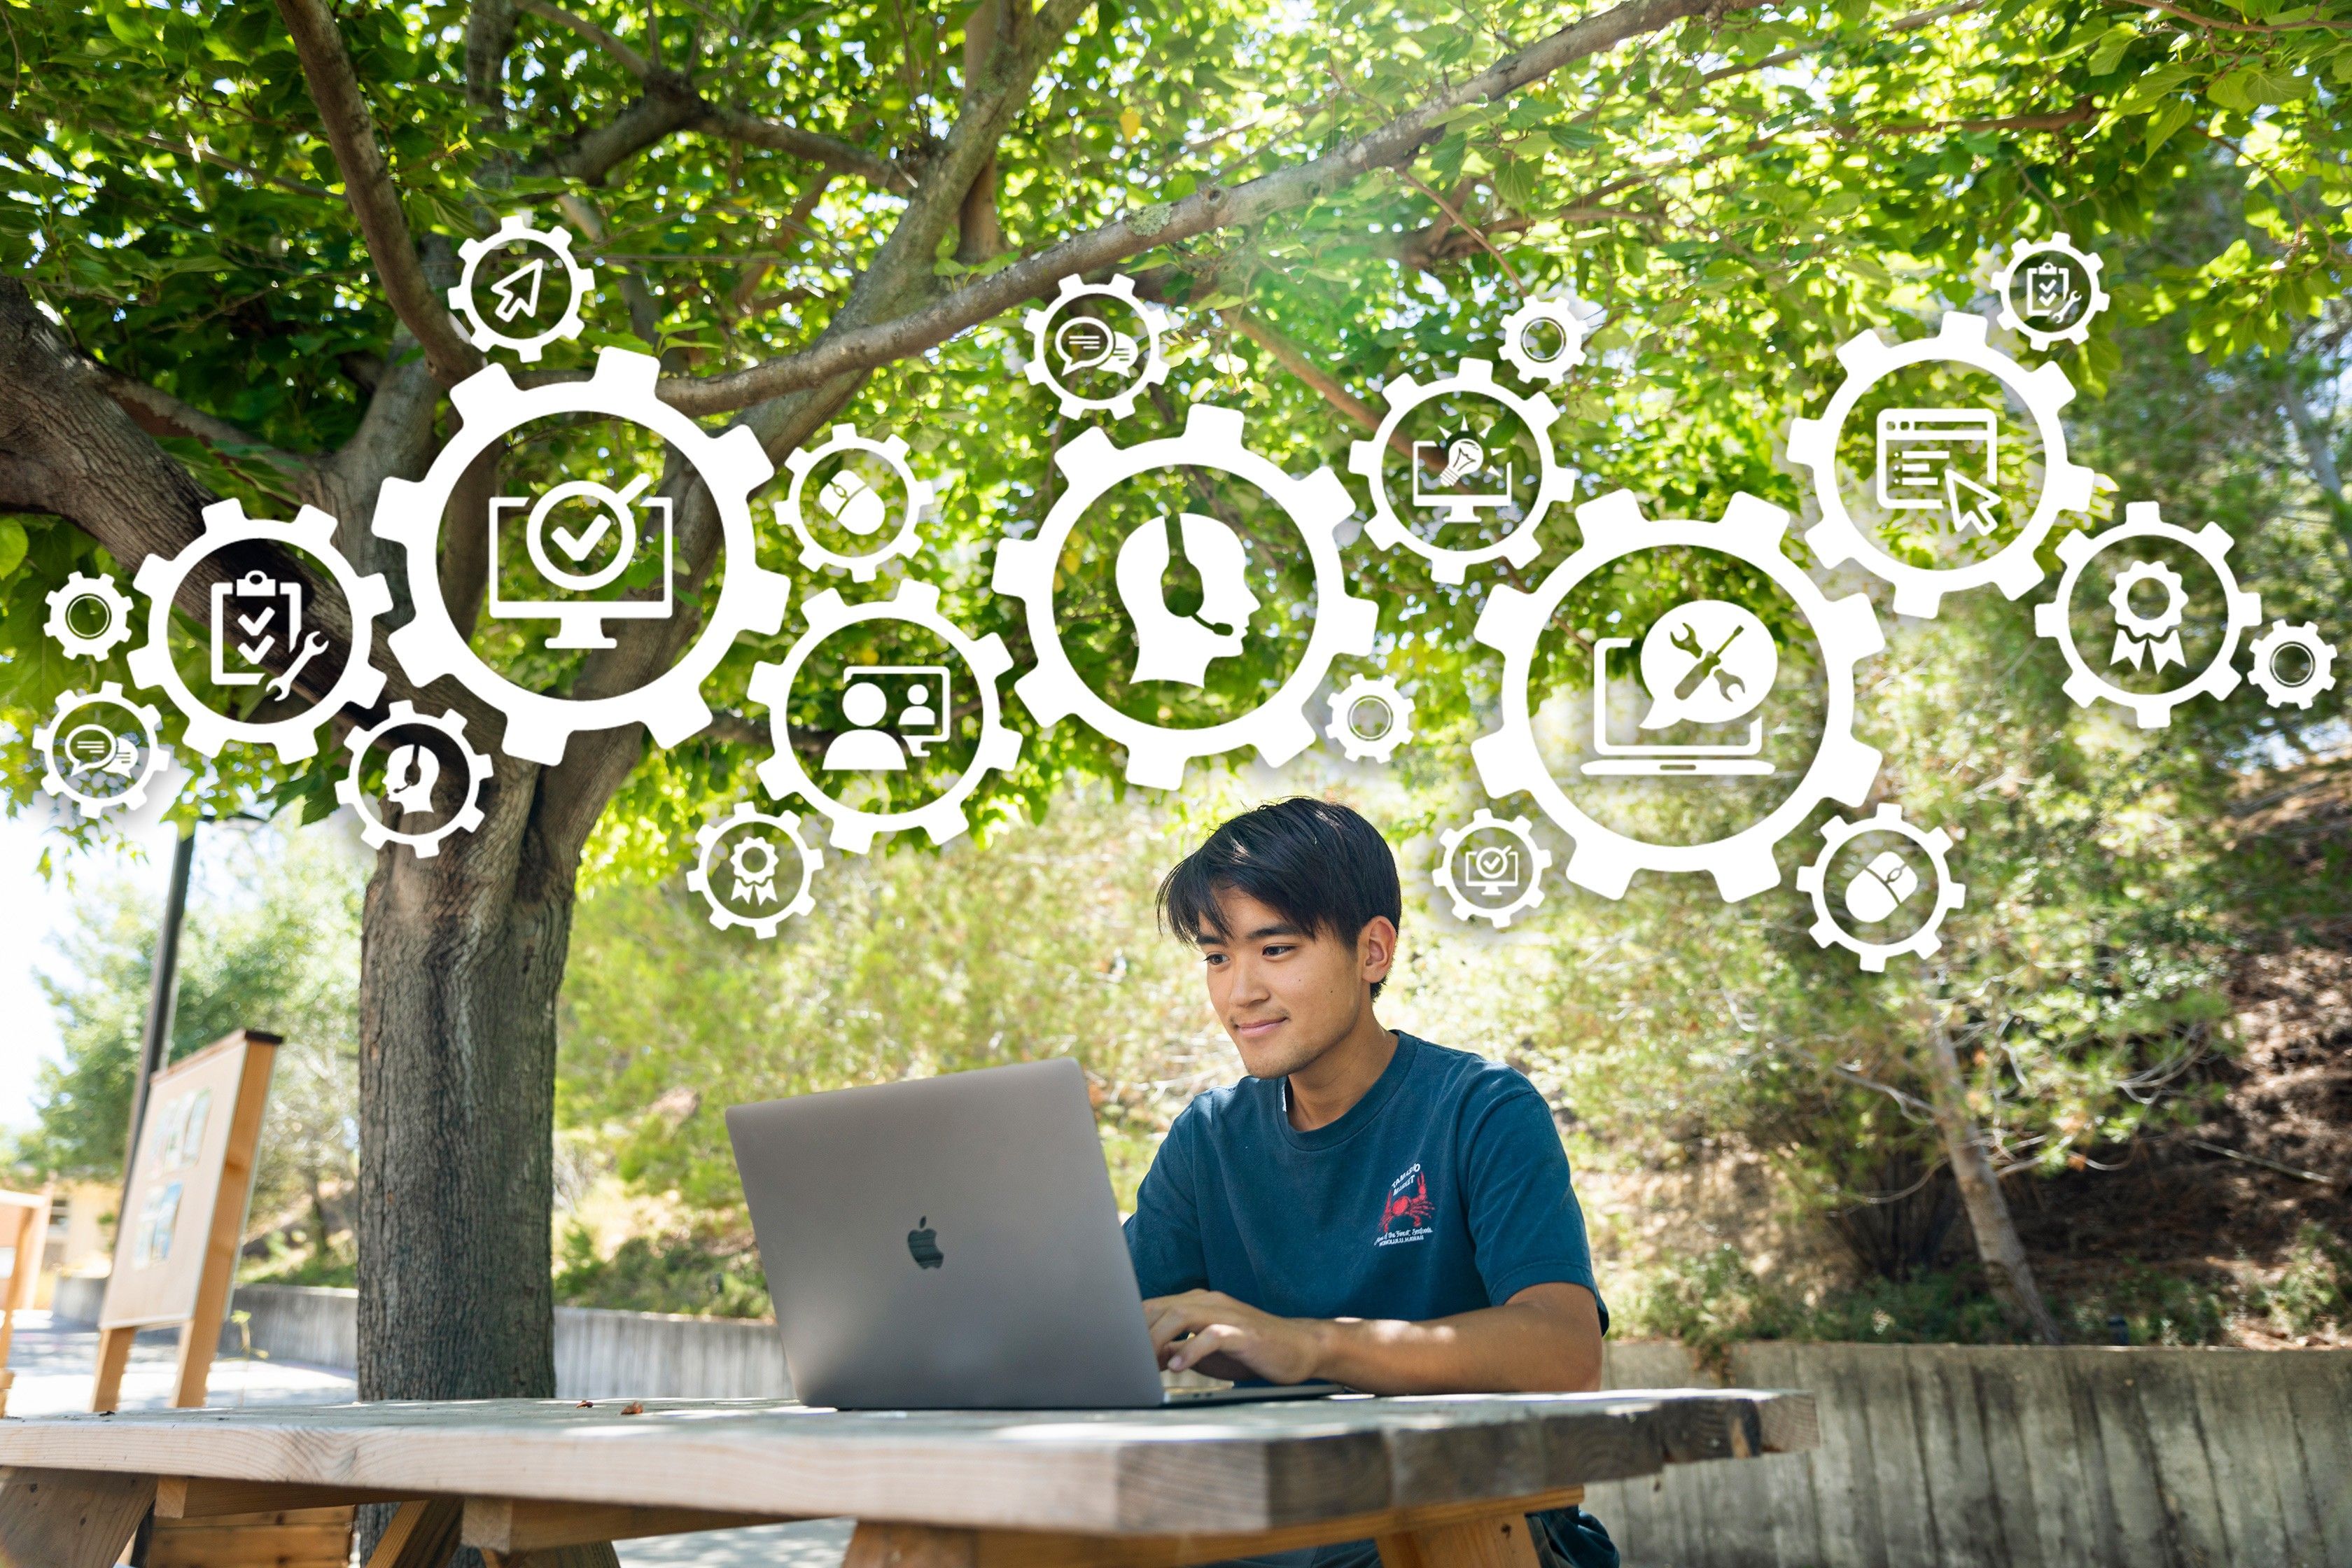 Cal Poly student sitting outdoors on a bench looking at their laptop screen. Random sized round gears with technology related icons floating above.